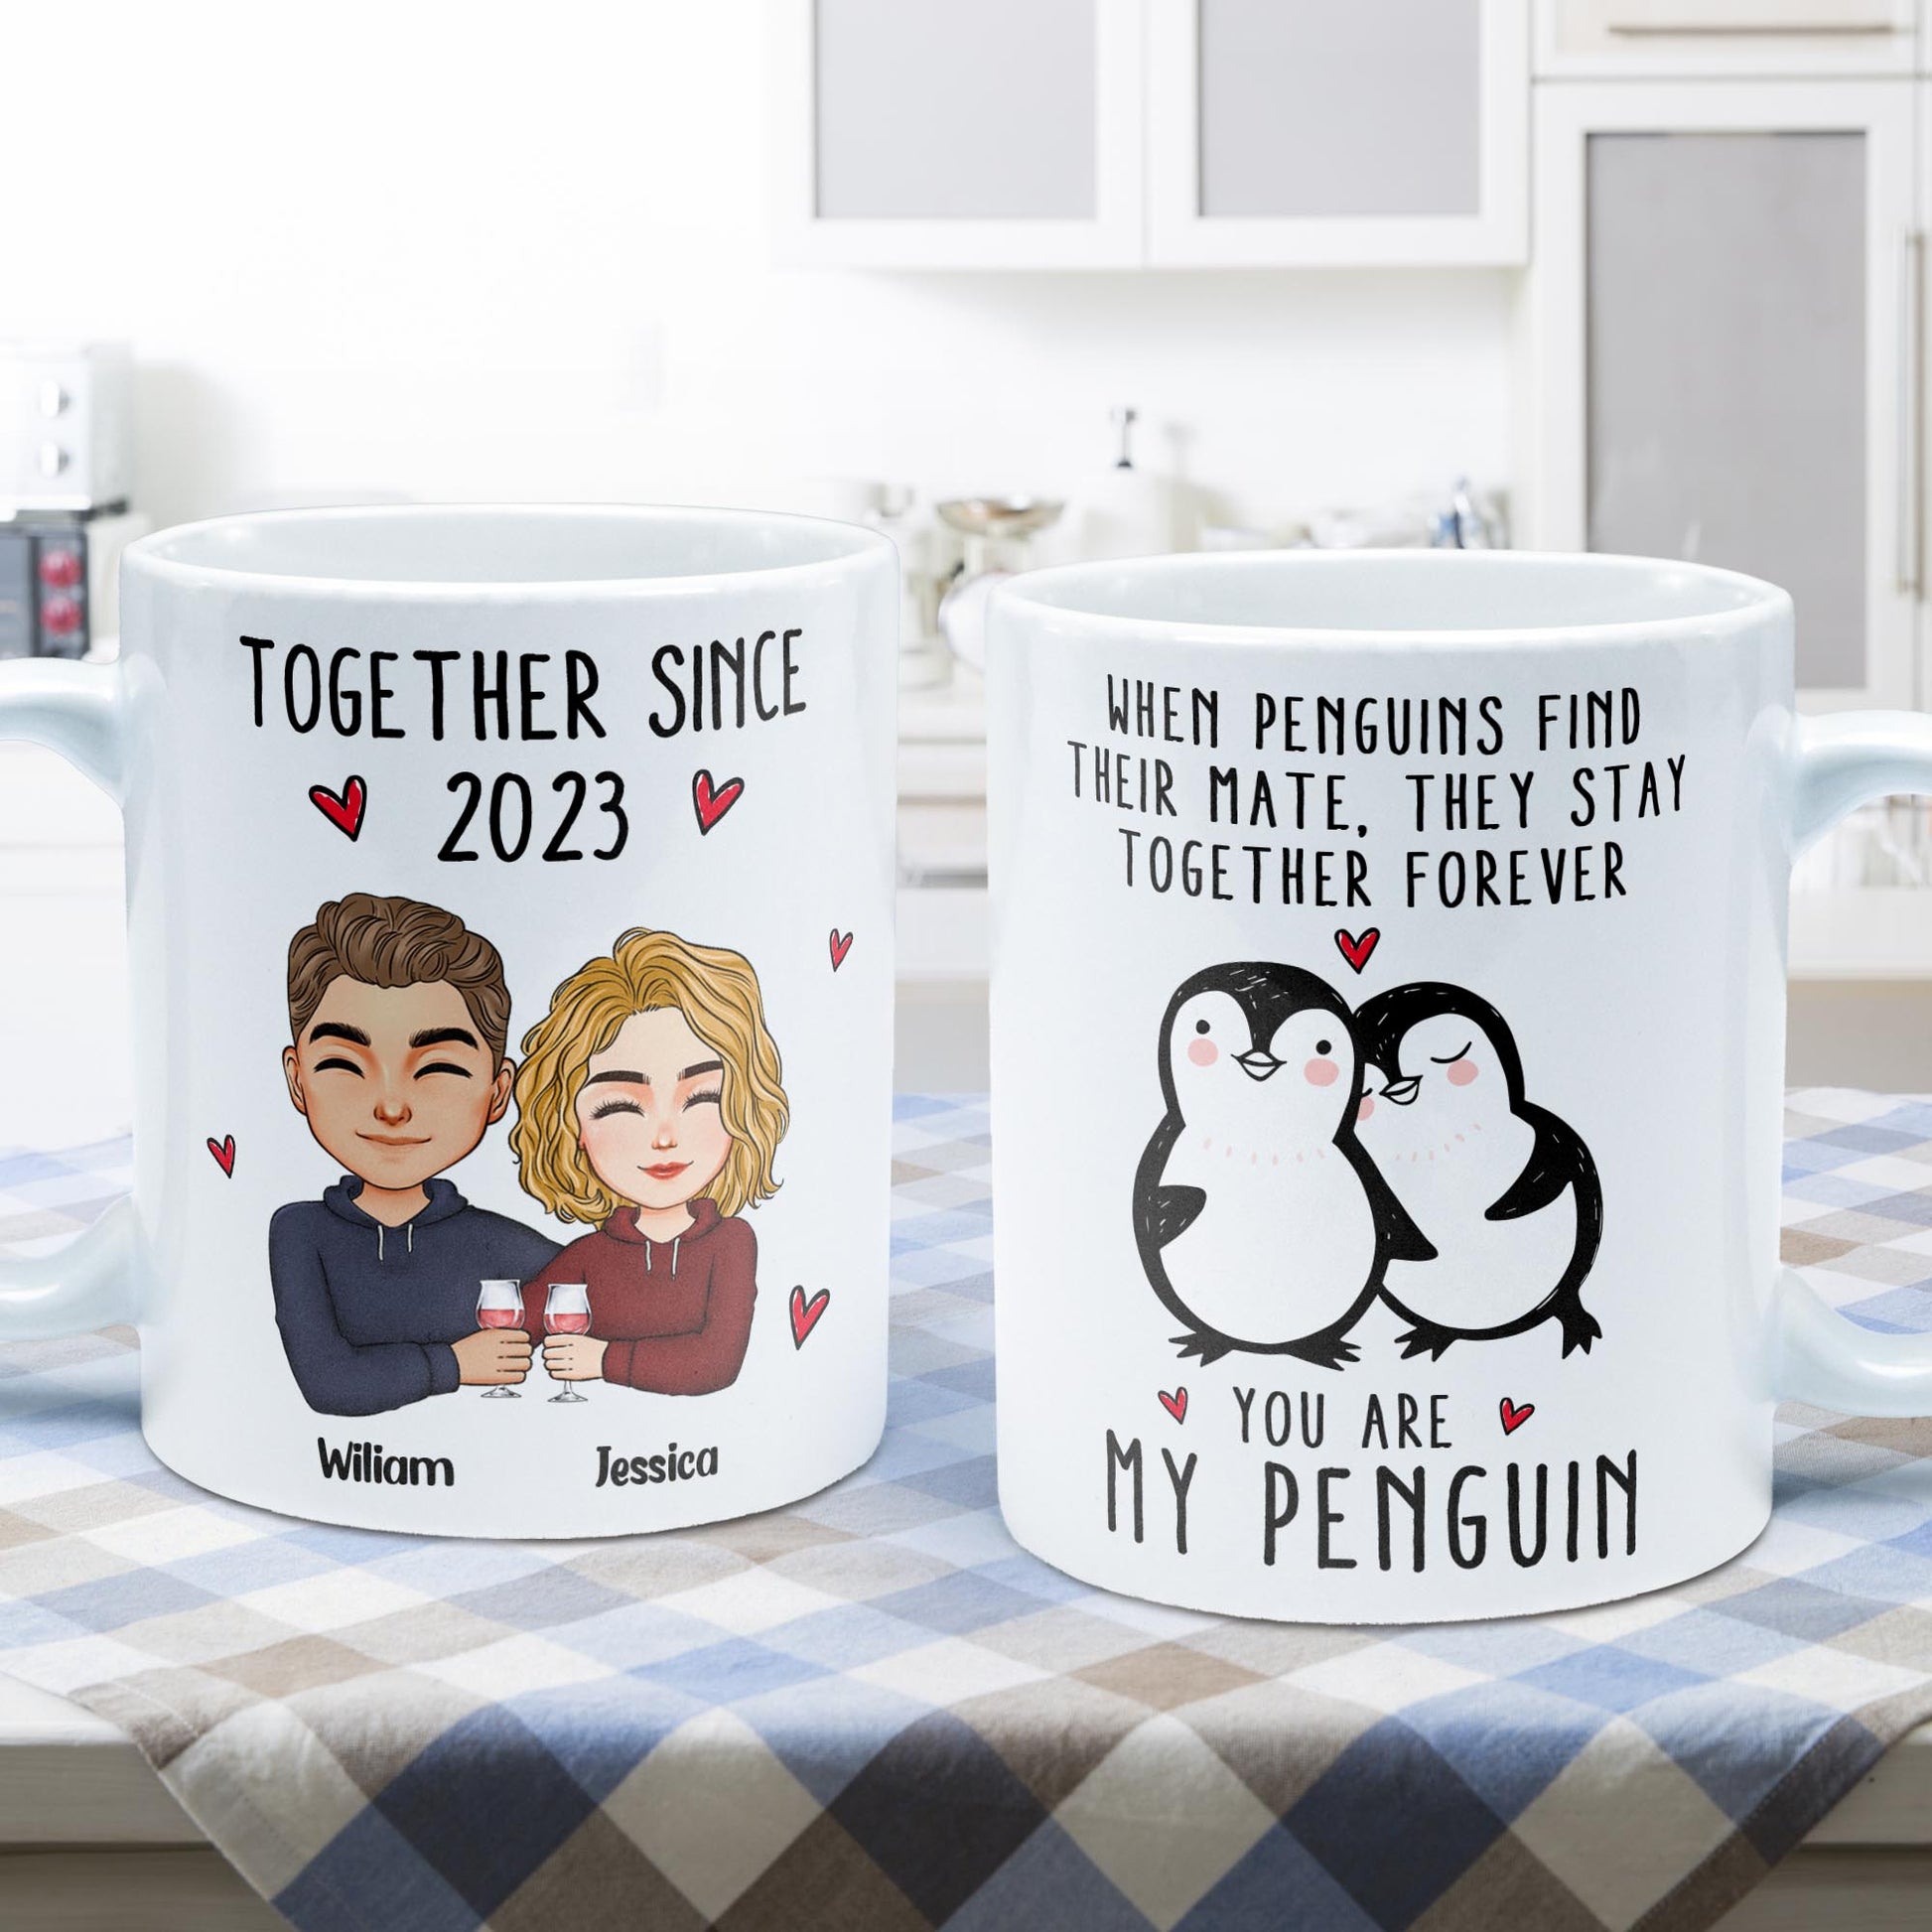 https://macorner.co/cdn/shop/files/When-Penguins-Find-Their-Mate_-They-Stay-Together-Forever-Personalized-Mug_6.jpg?v=1685608234&width=1946